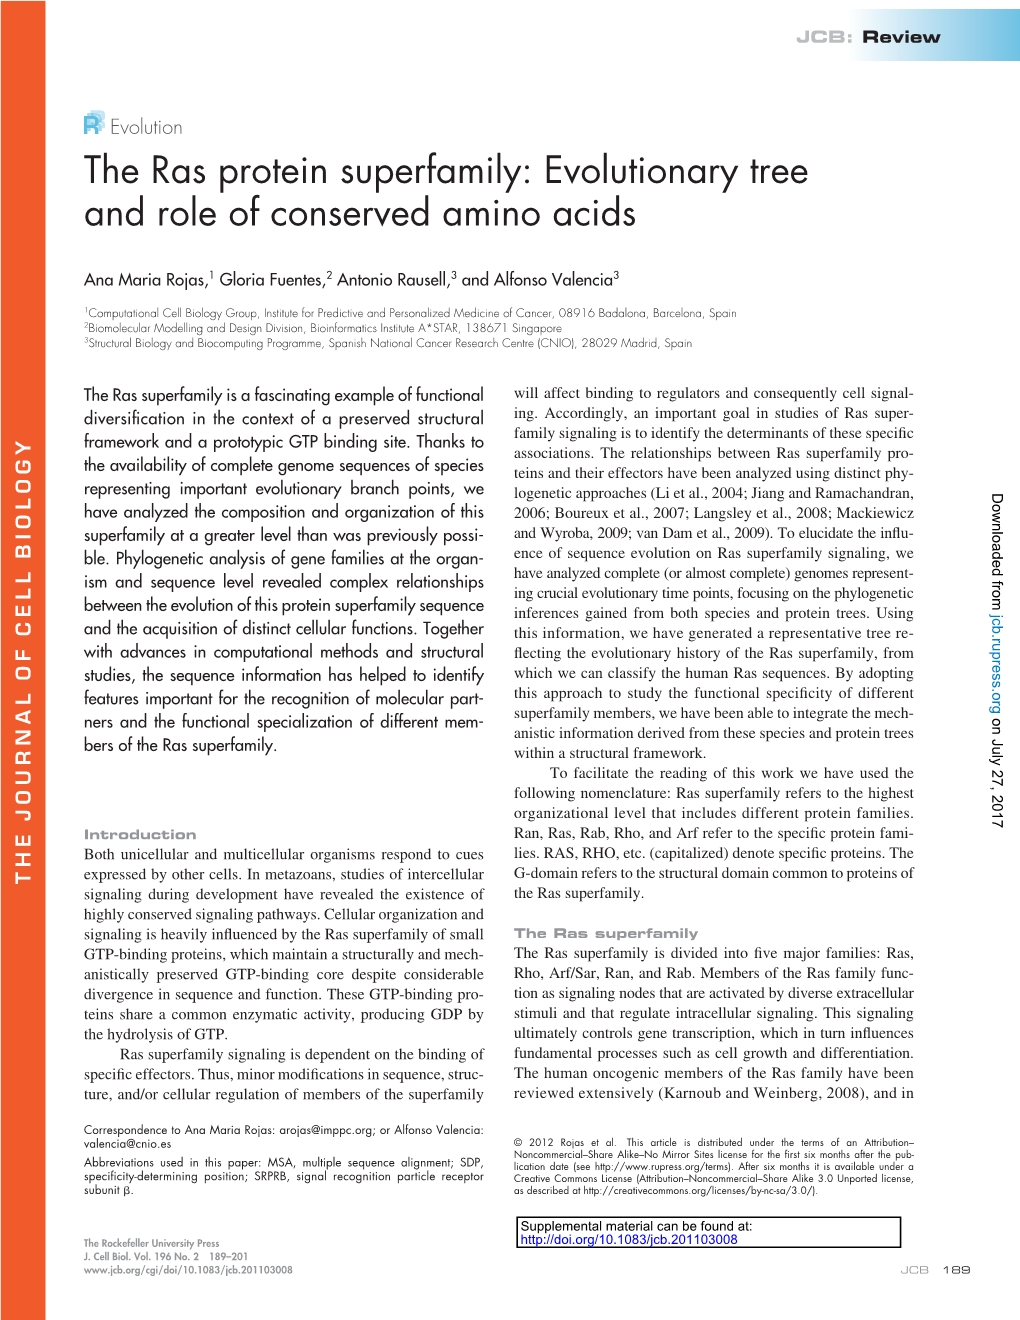 The Ras Protein Superfamily: Evolutionary Tree and Role of Conserved Amino Acids